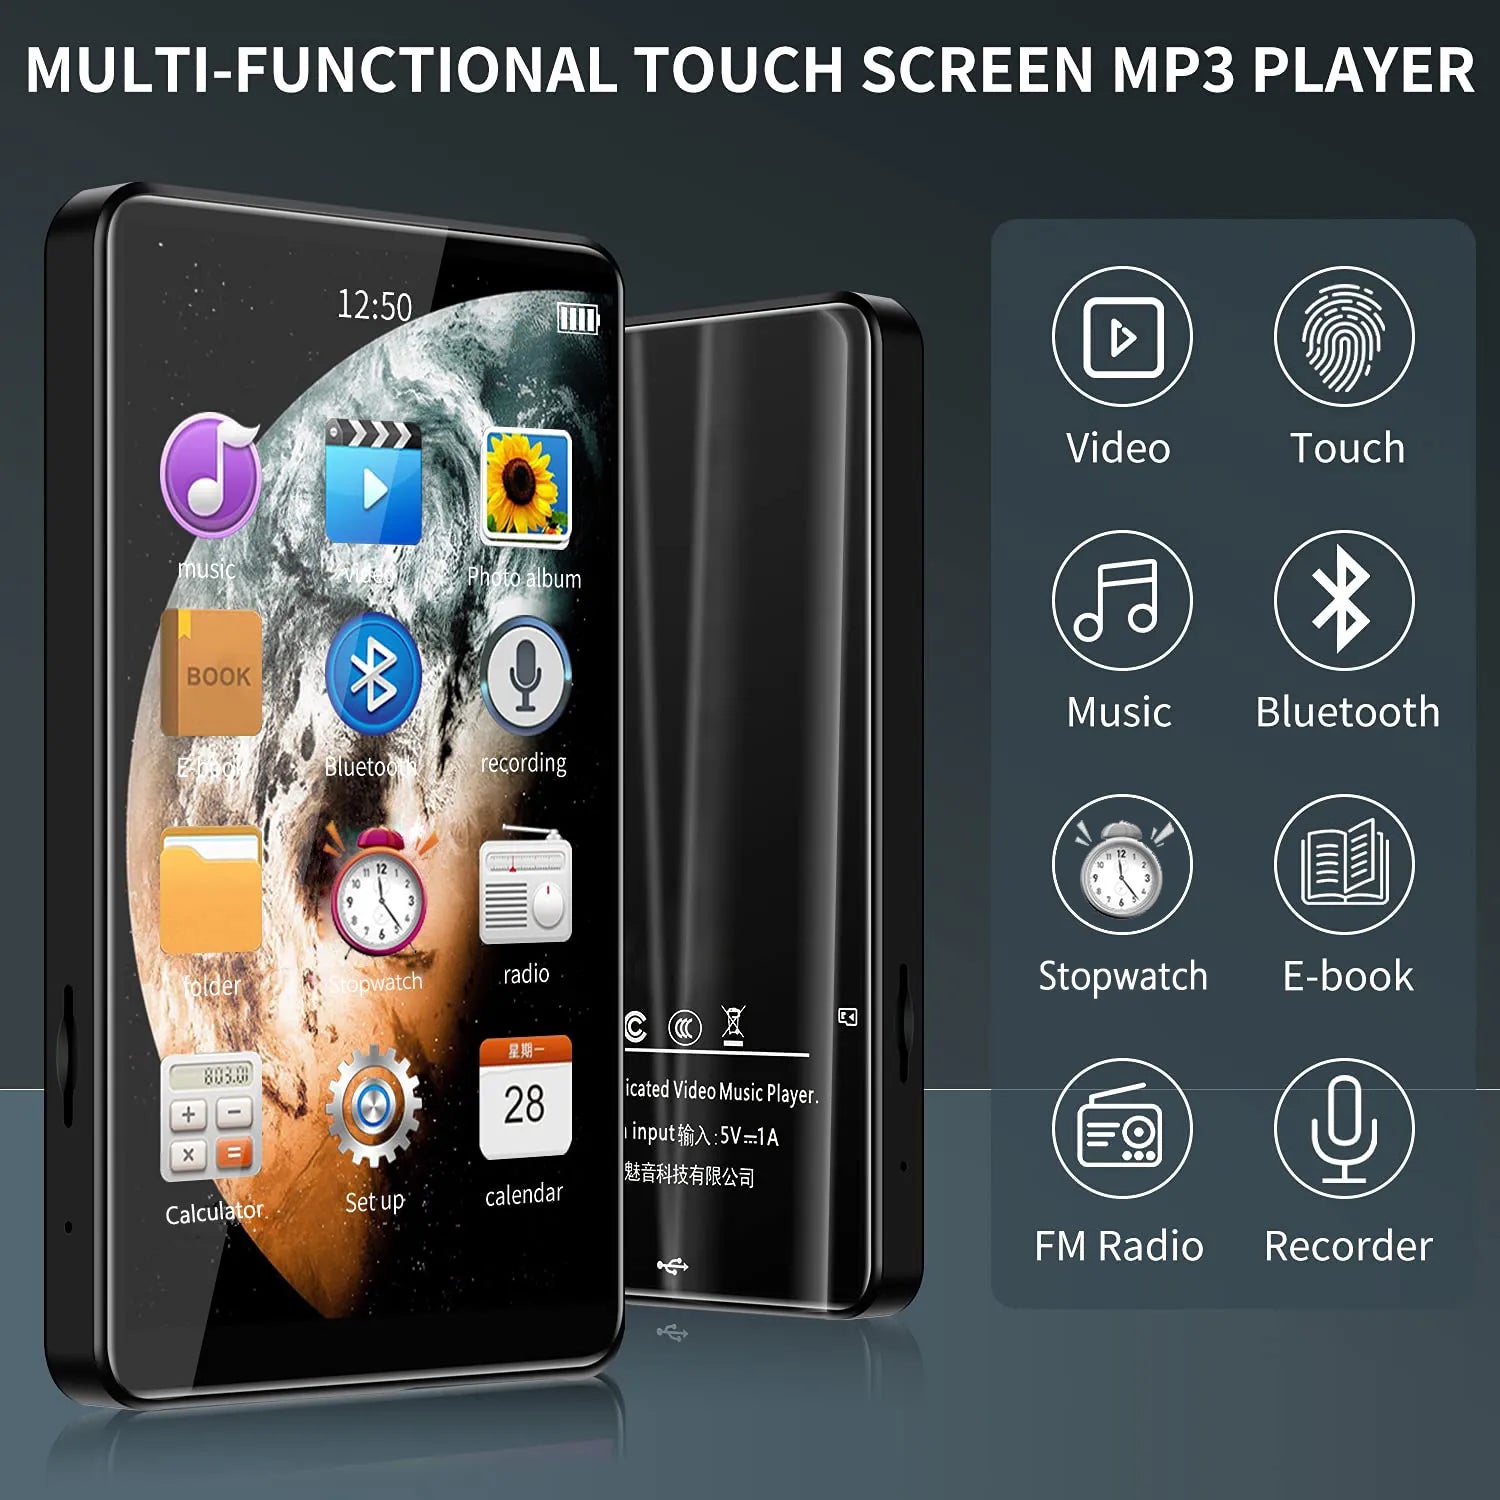 MP4 Player 4'' Full Metal Touch Screen MP3 MP4 Music Player Bluetooth 5.0 FM Radio With Video Playback APE FLAC WAV AAC-LC ACELP